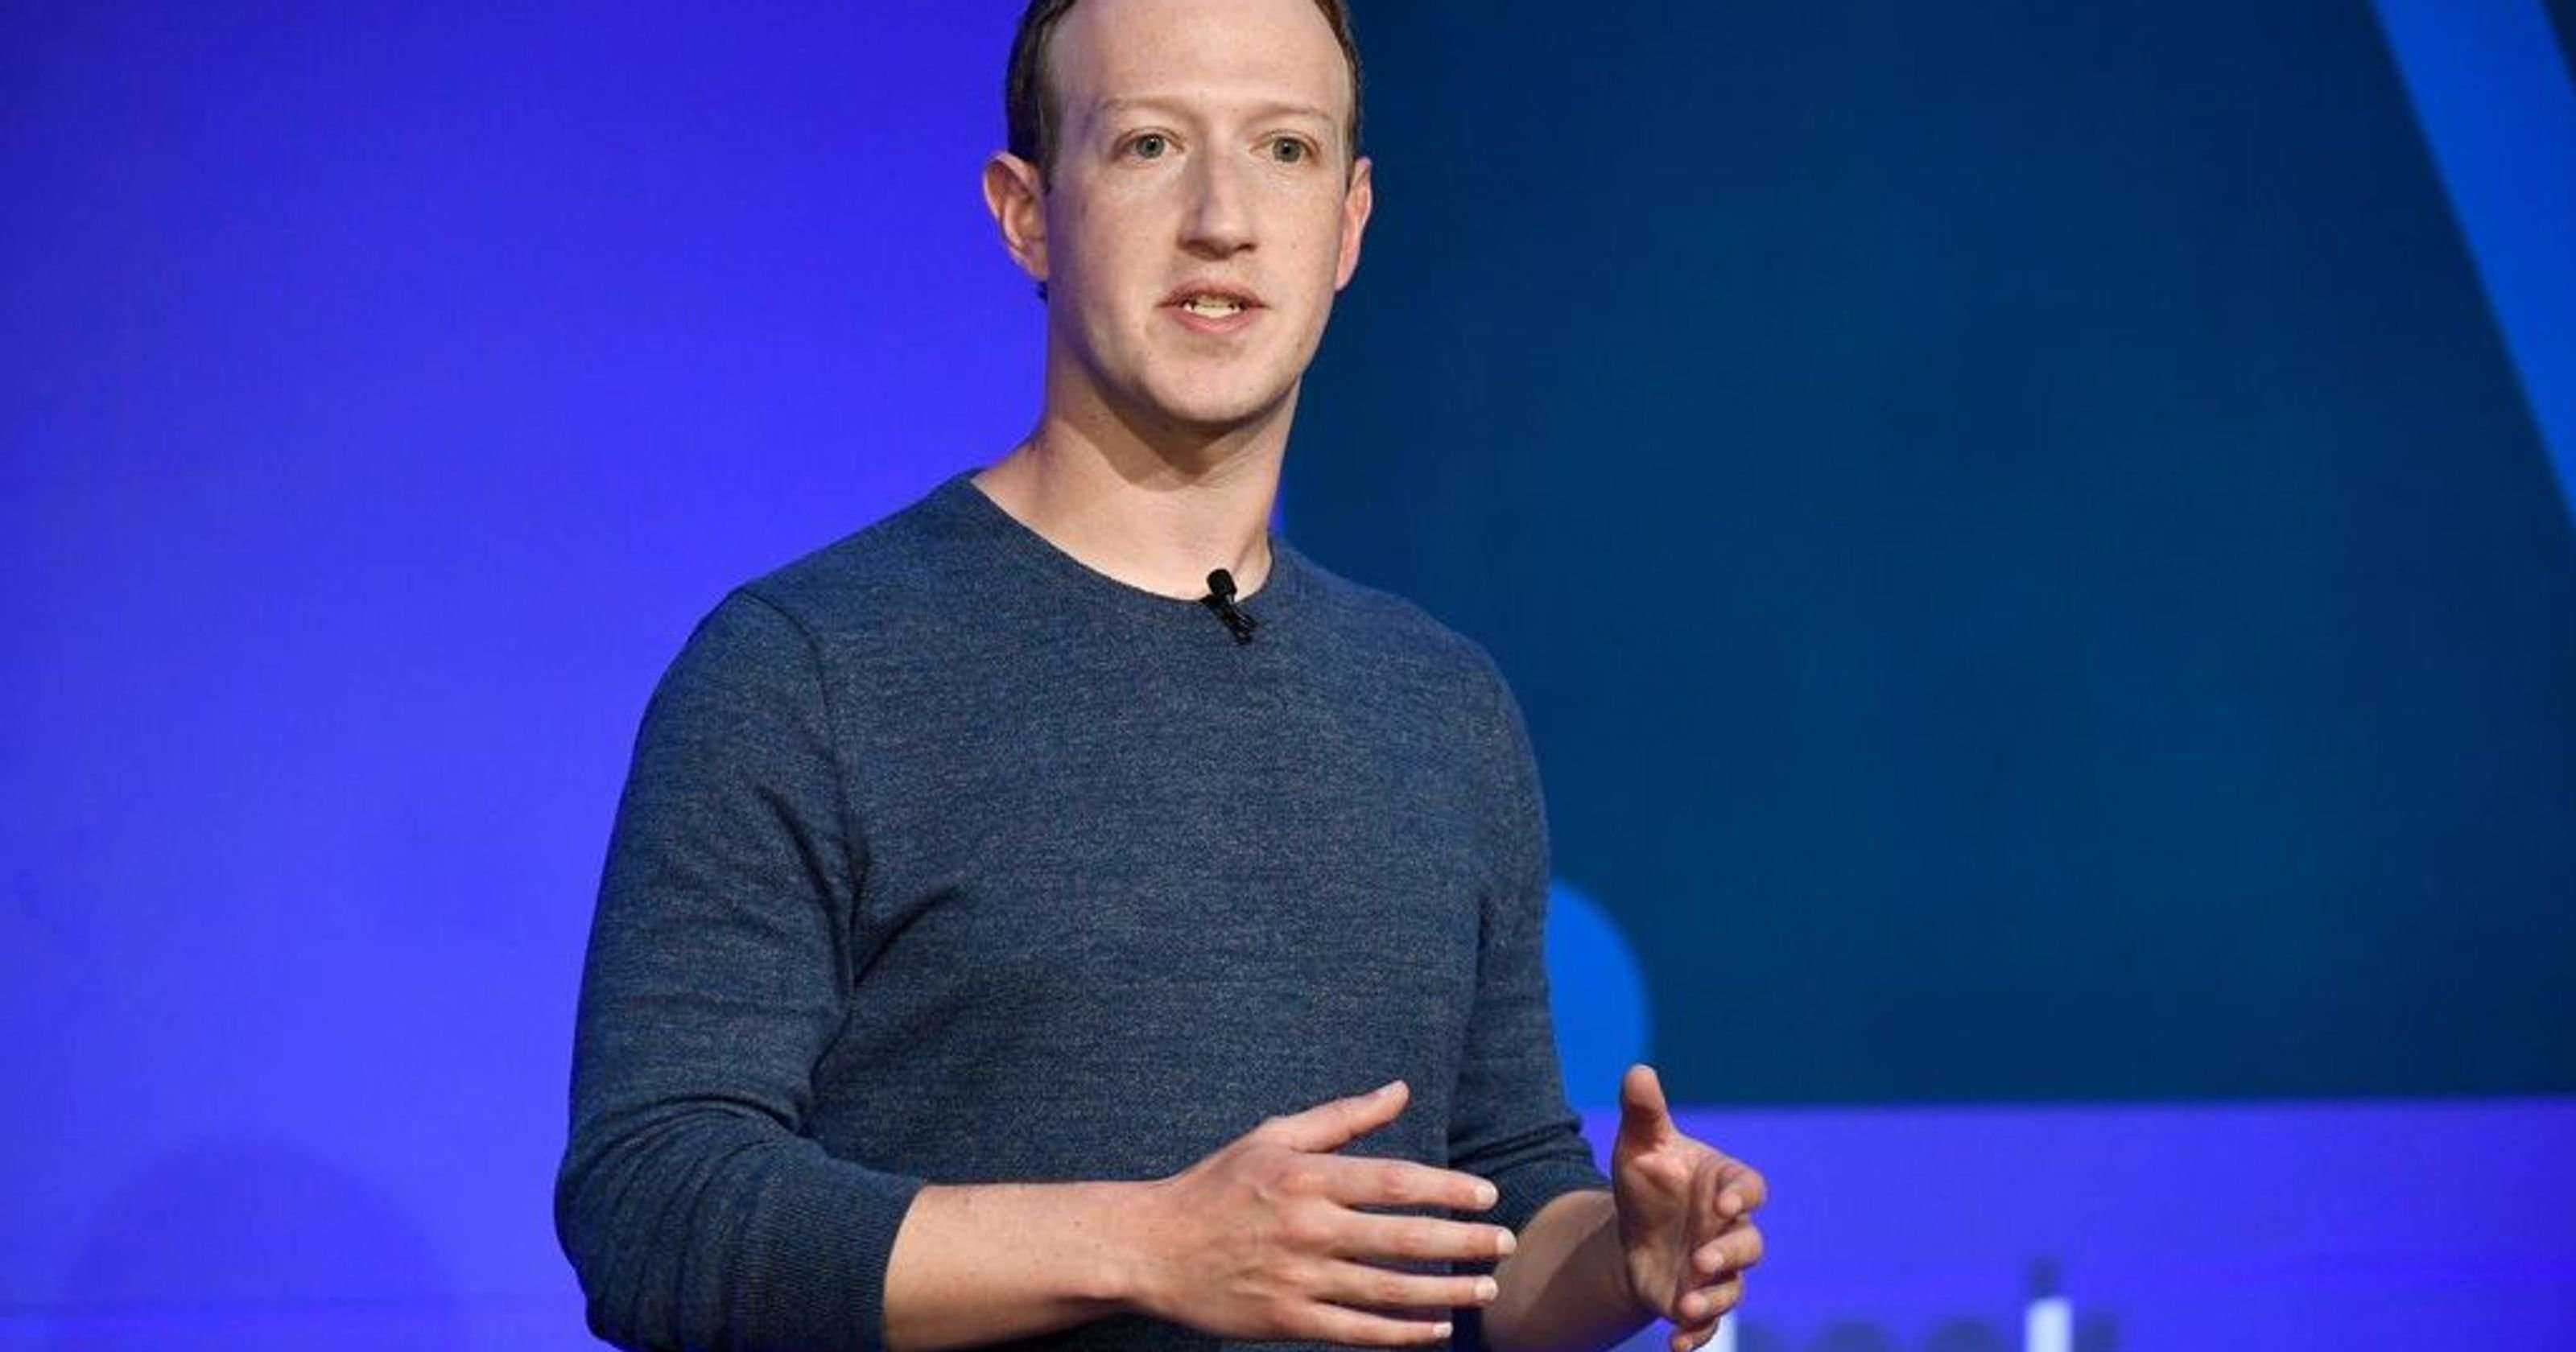 image for Facebook CEO Mark Zuckerberg loses more than $15 billion in wealth in a single day